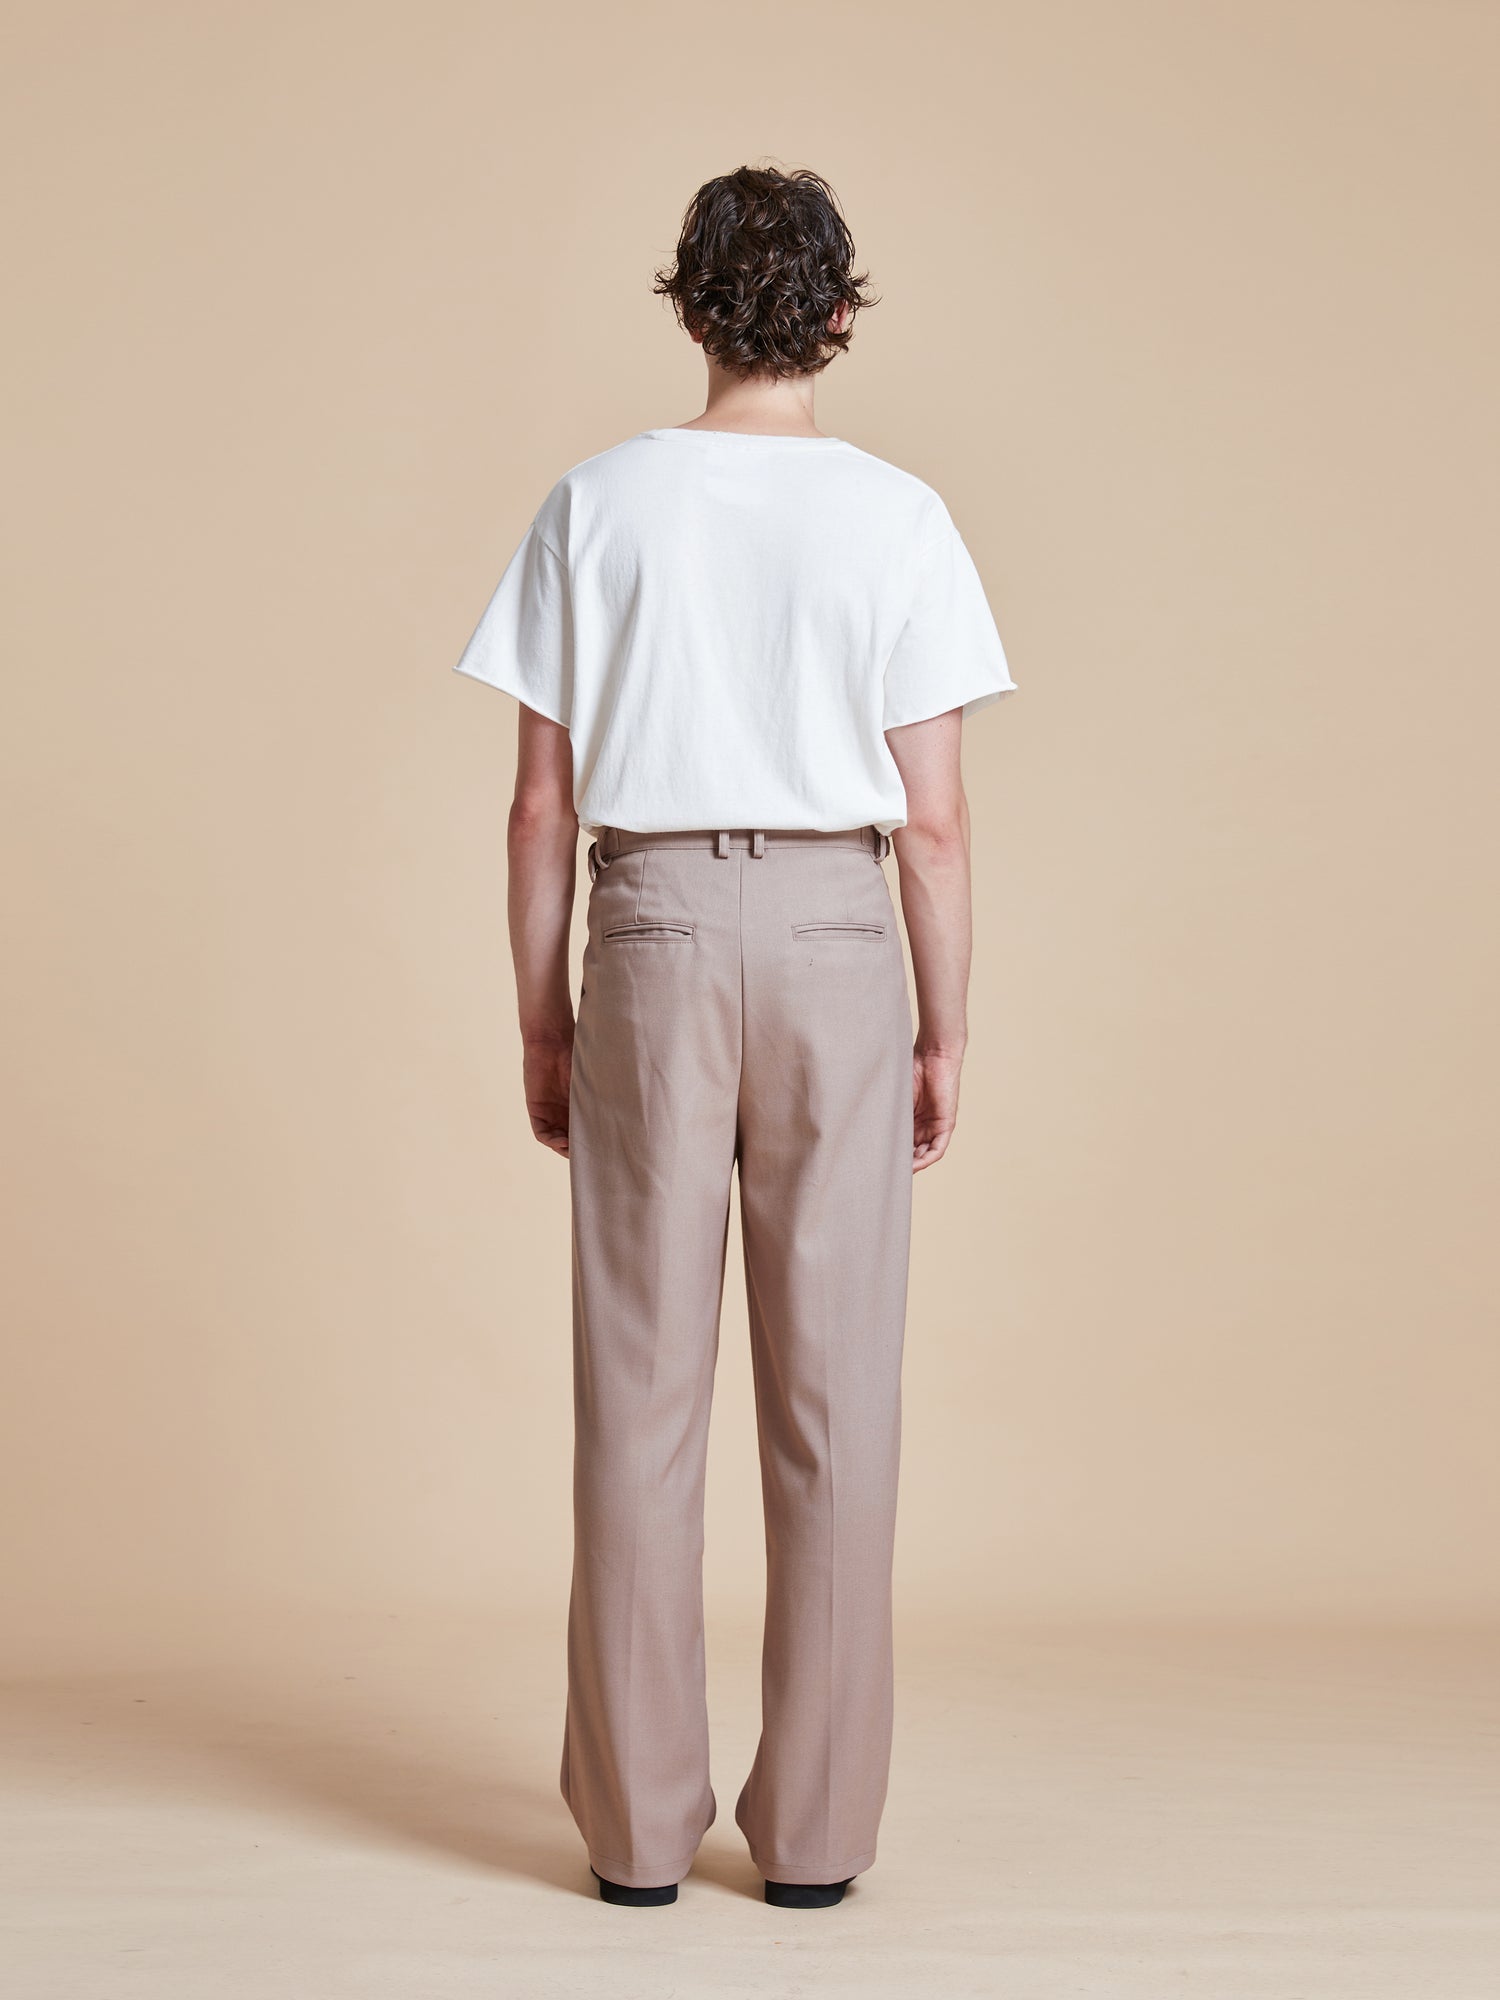 The back view of a man wearing Found Pleated Trousers.